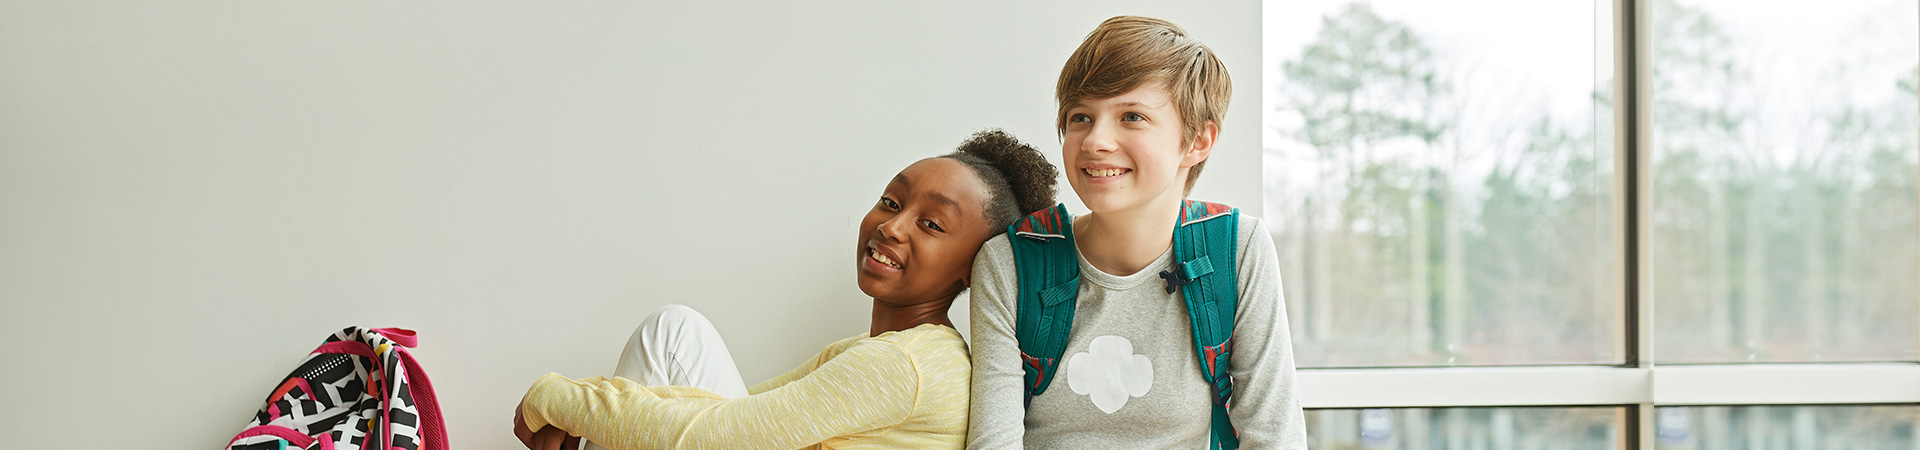  two girl scouts wearing trefoil clothing leaning on one another indoors 